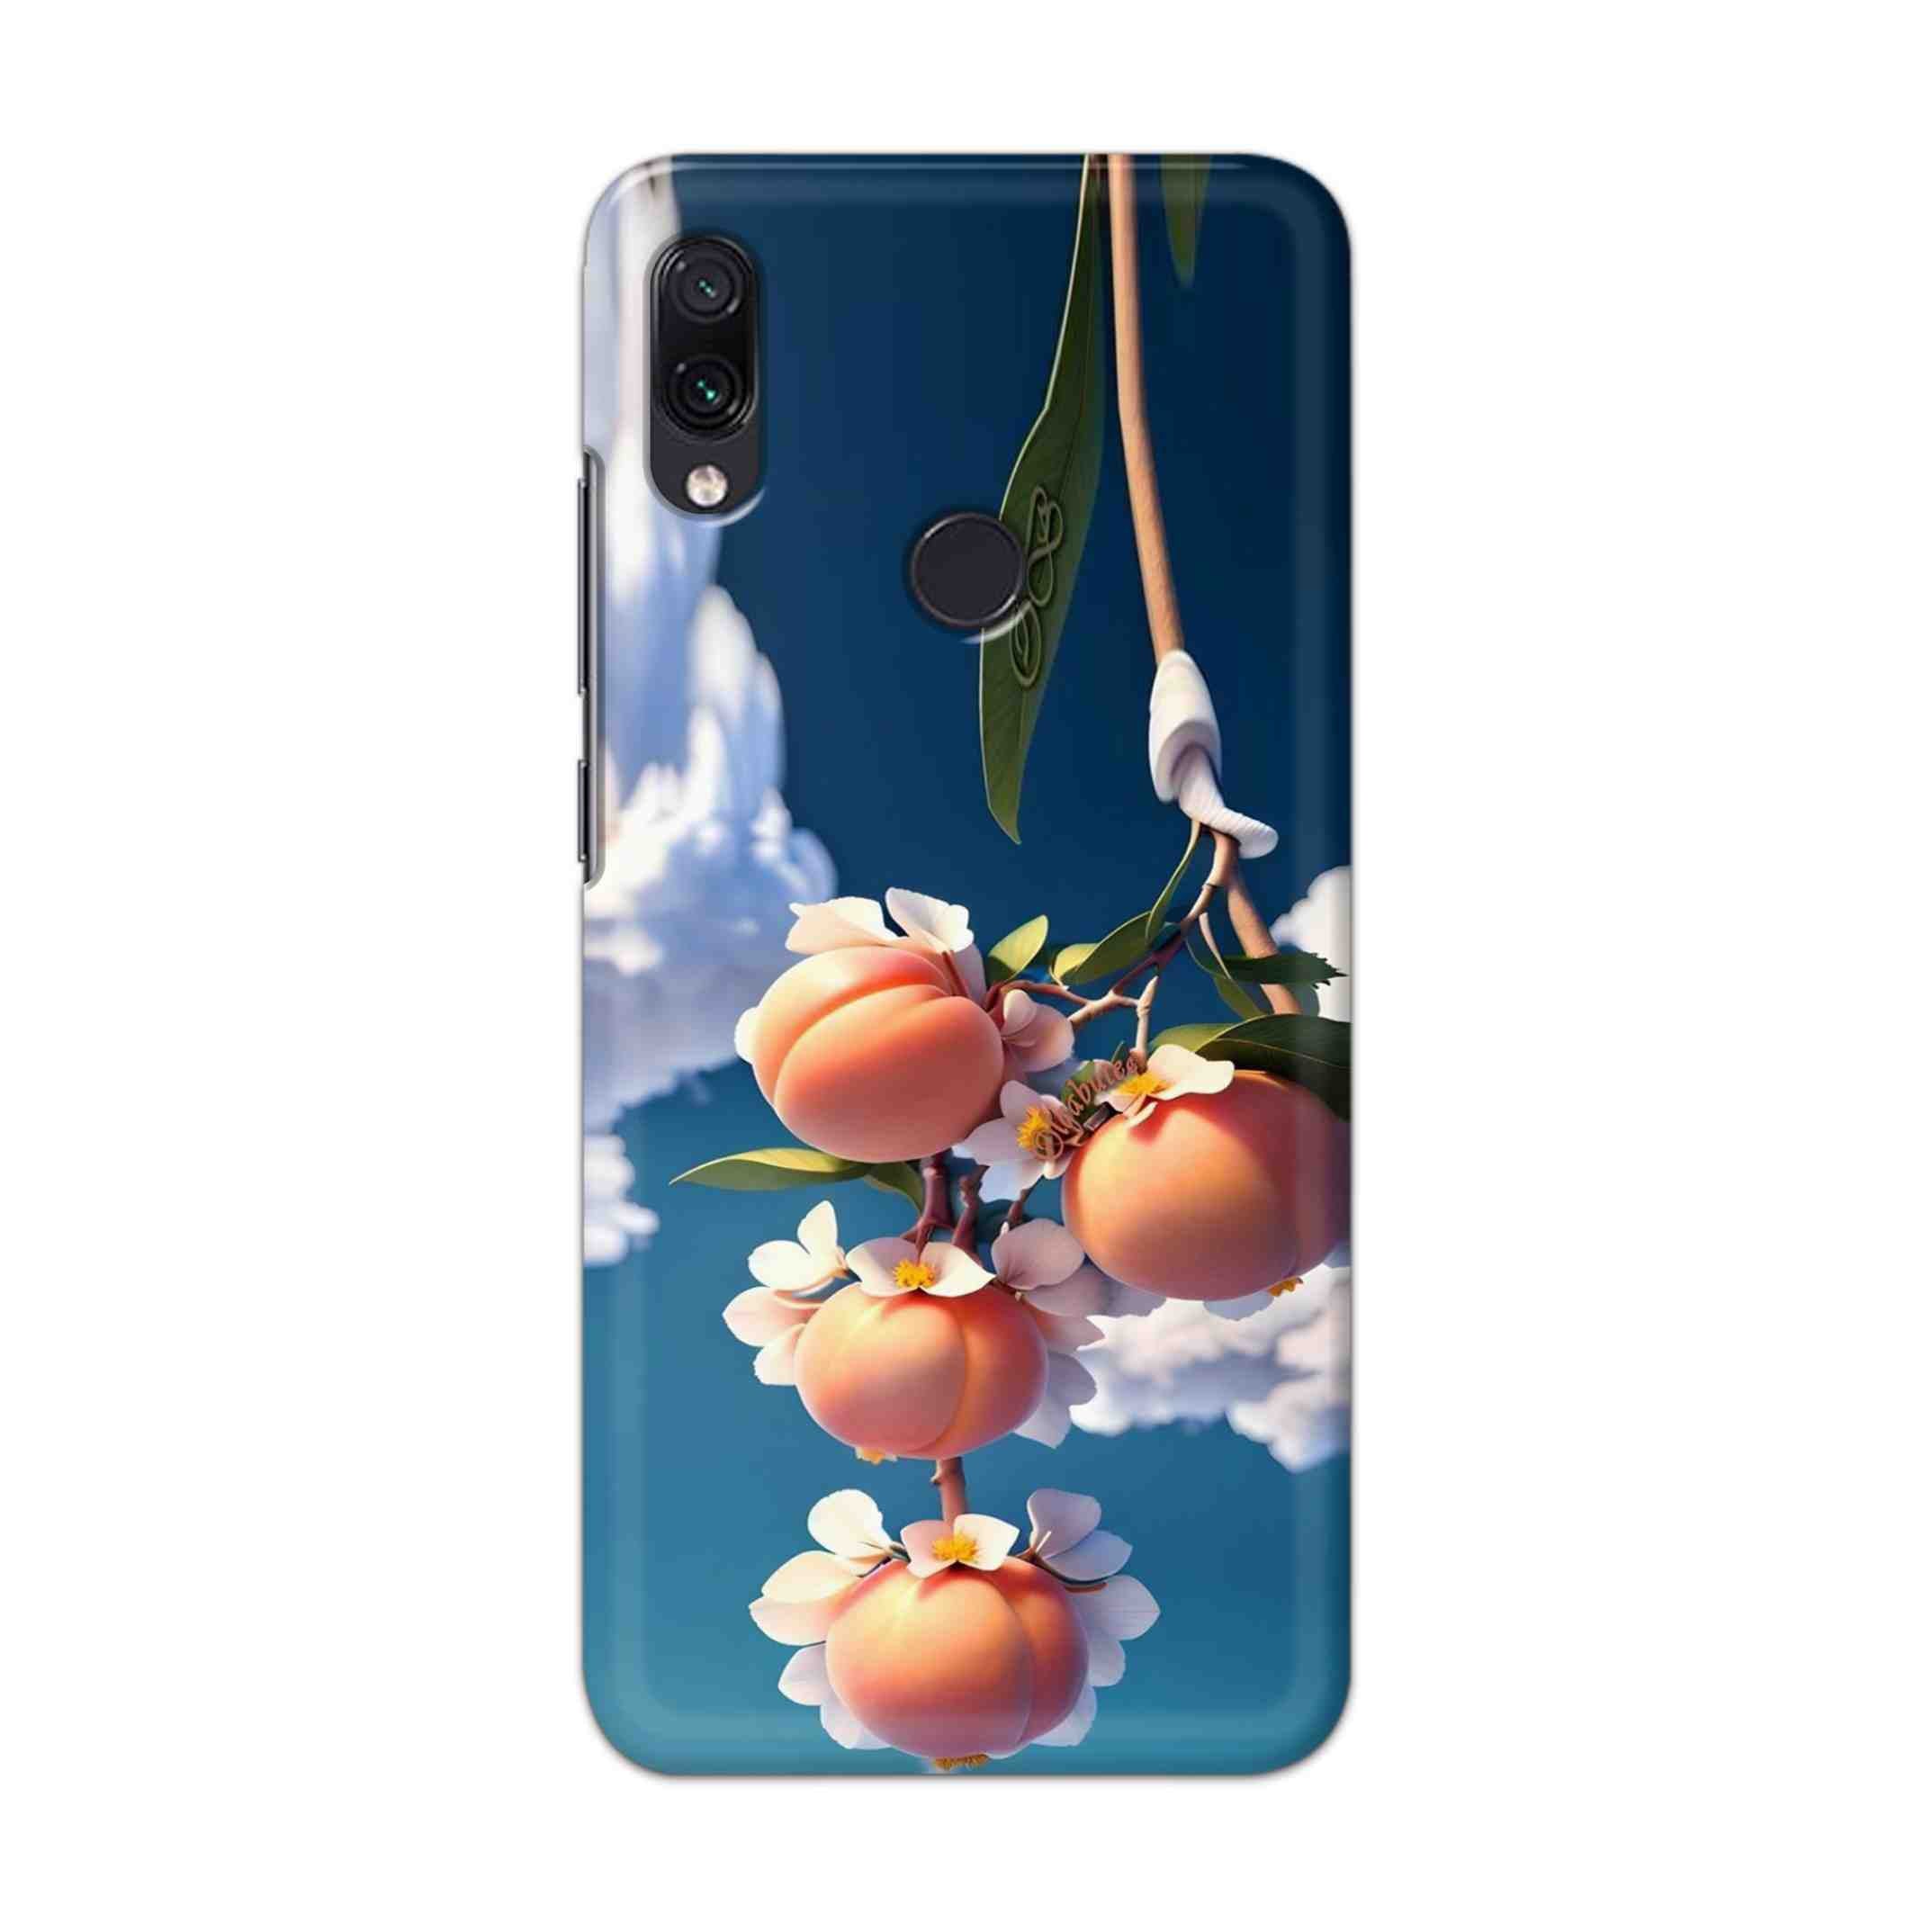 Buy Fruit Hard Back Mobile Phone Case Cover For Xiaomi Redmi 7 Online